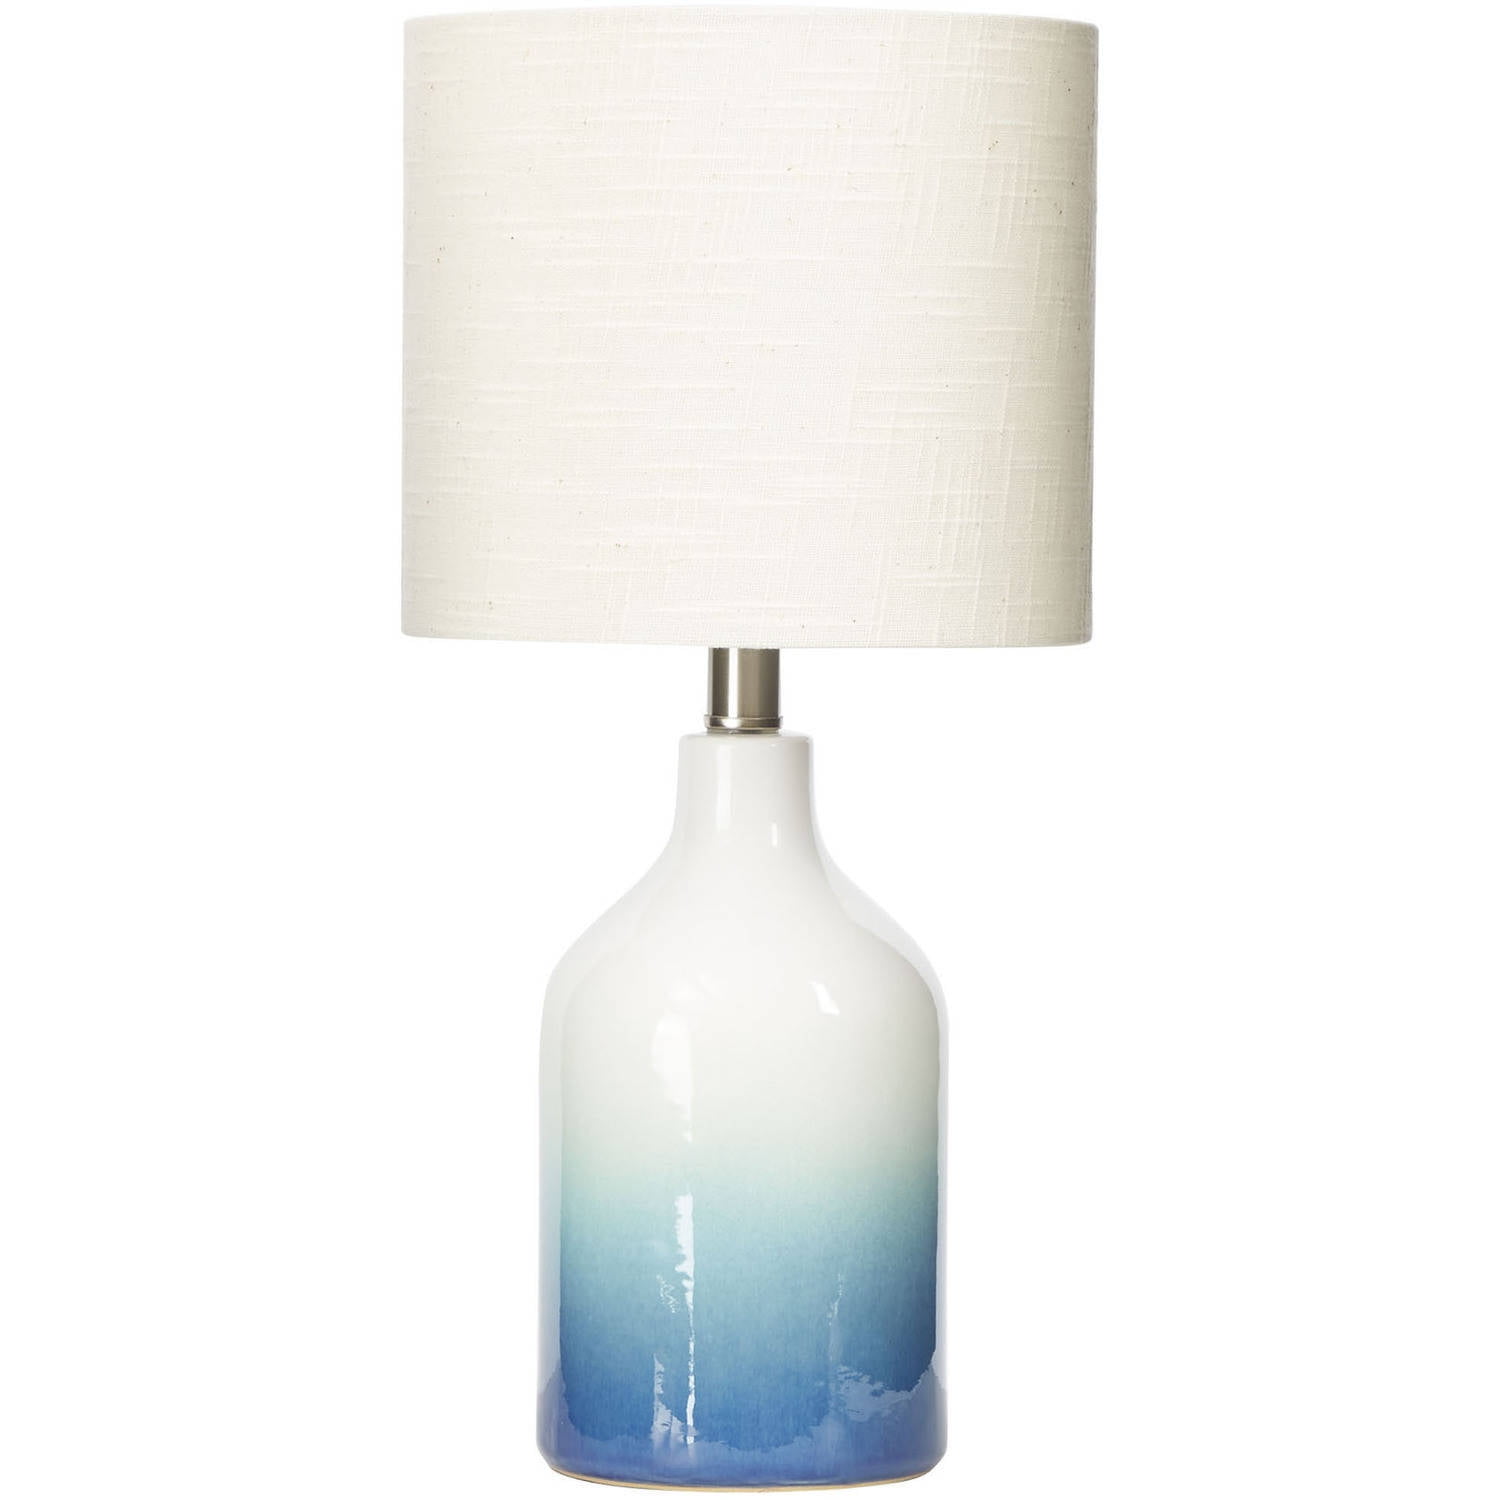 Gardens Ombre Ceramic Table Lamp Blue, Blue Grey Ceramic Table Lamps